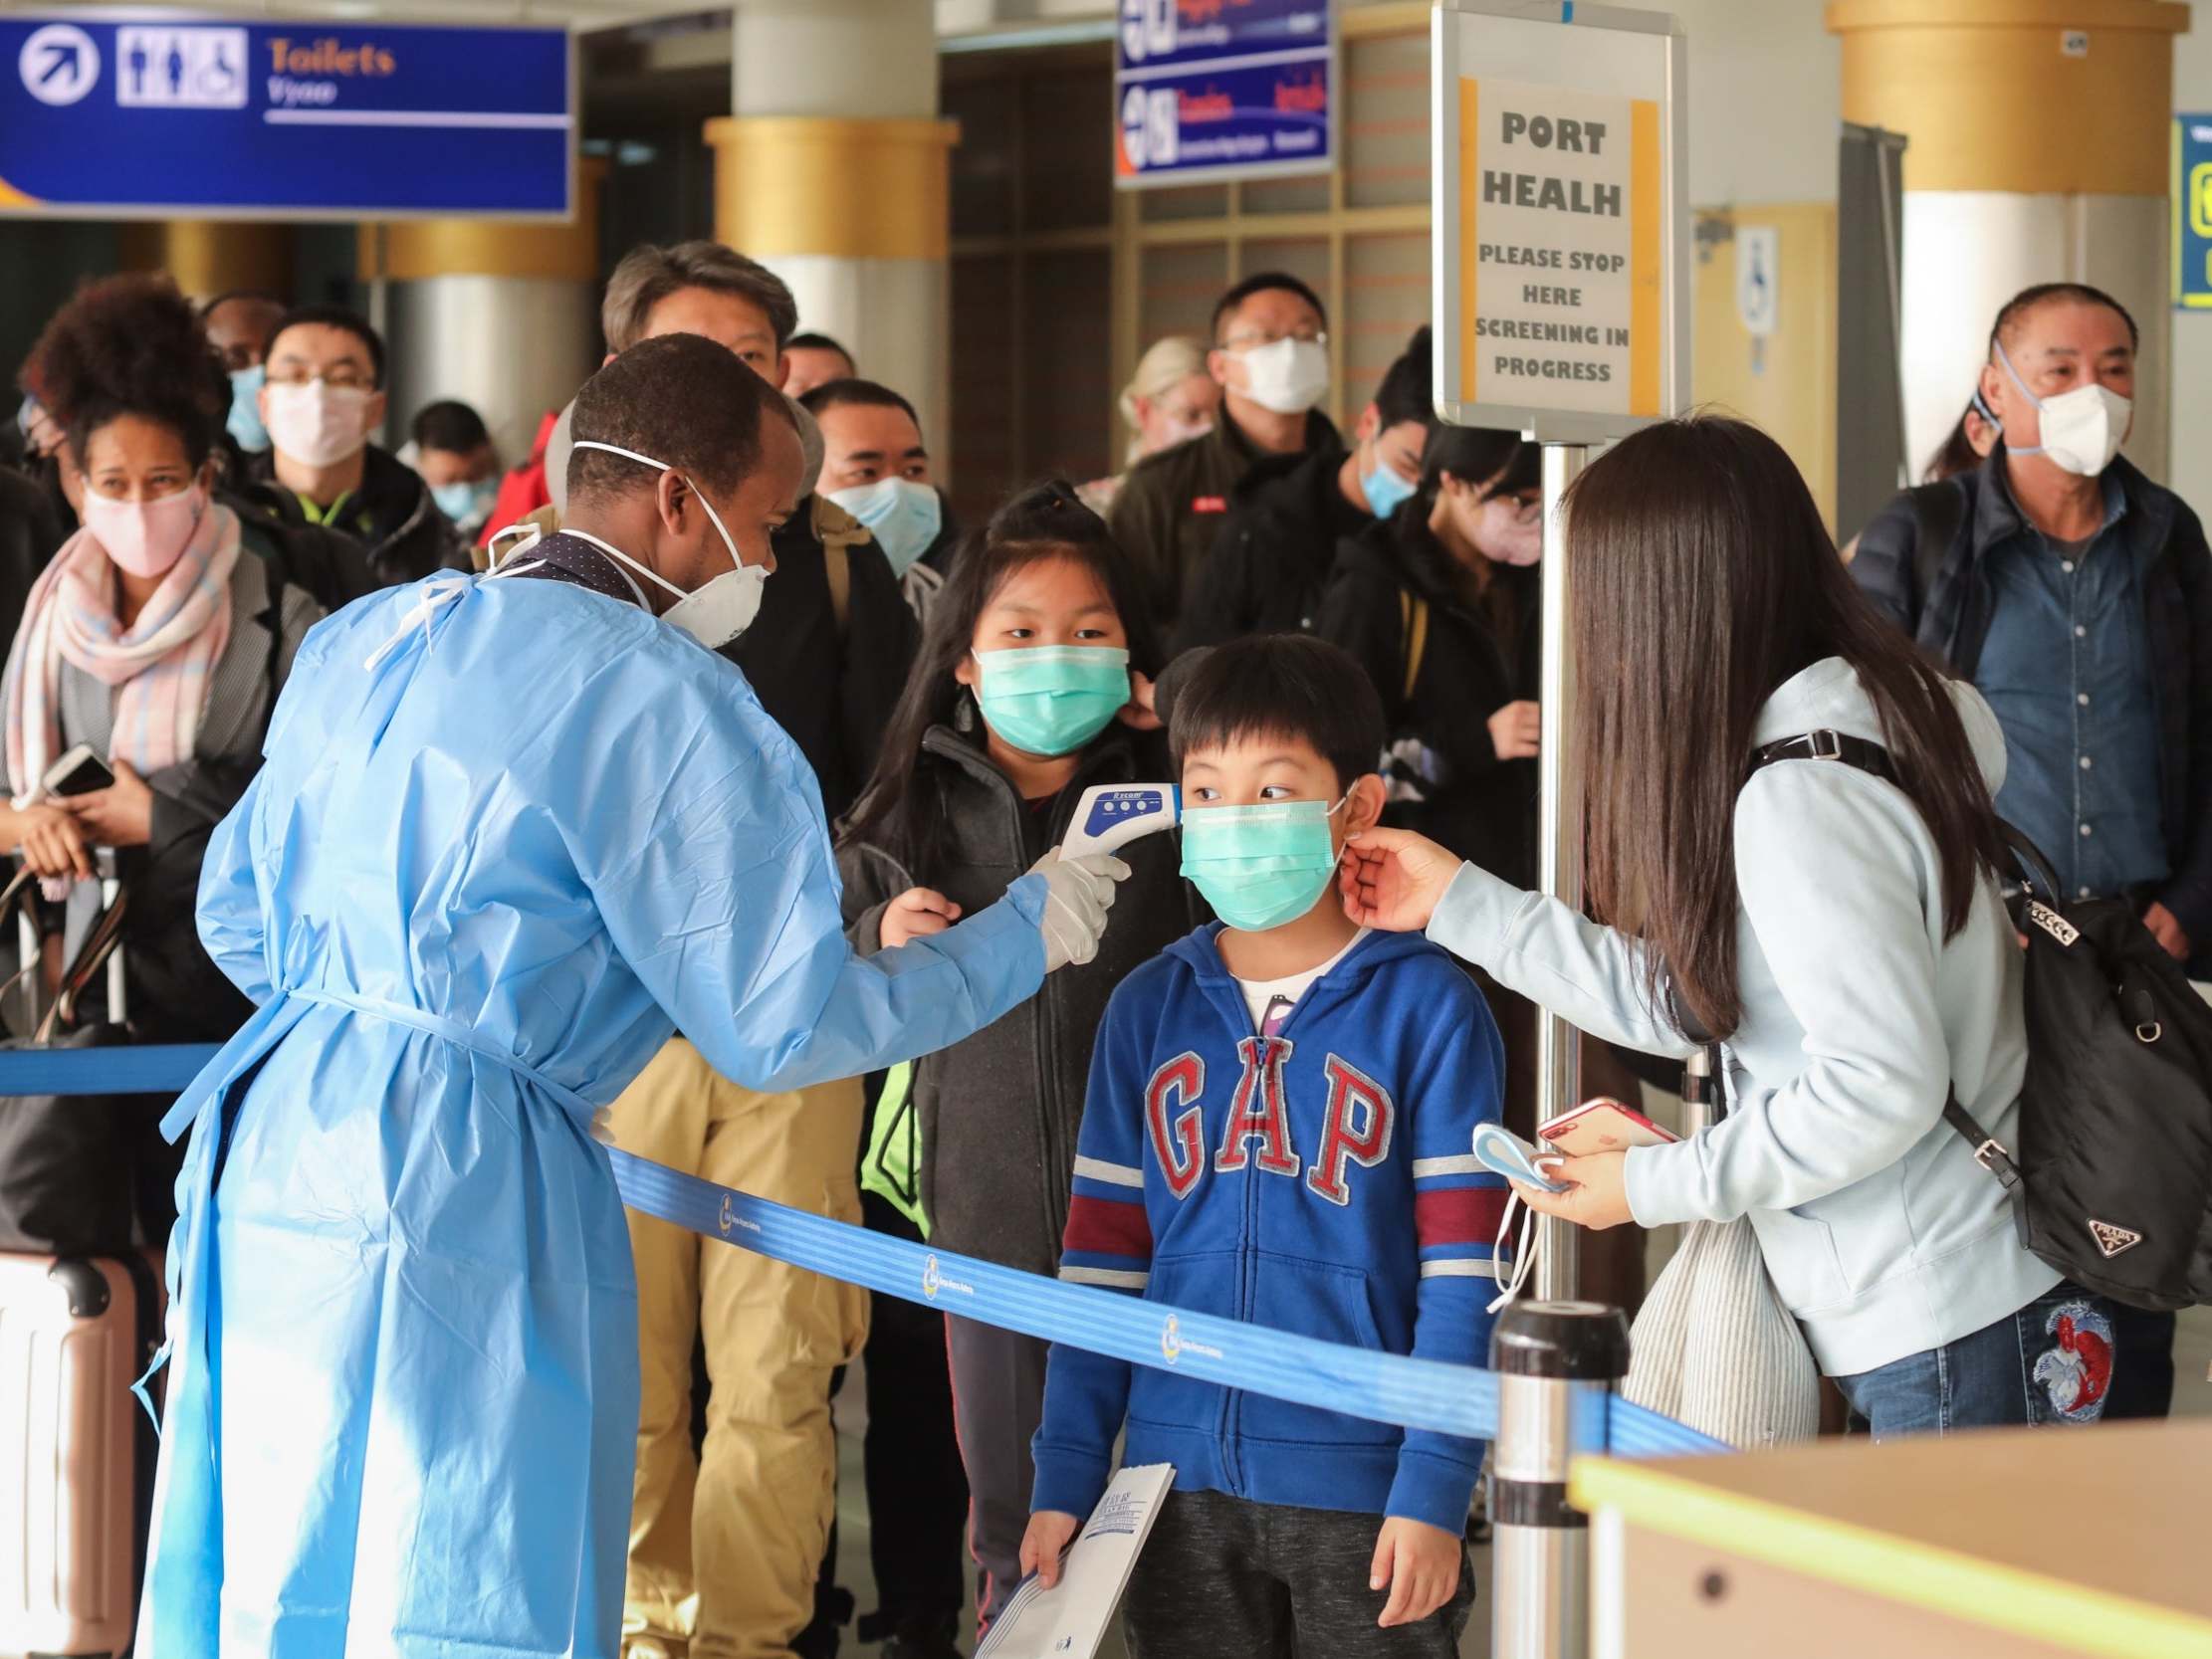 Across the world, countries are imposing checks on passengers to try to reduce the spread of the virus